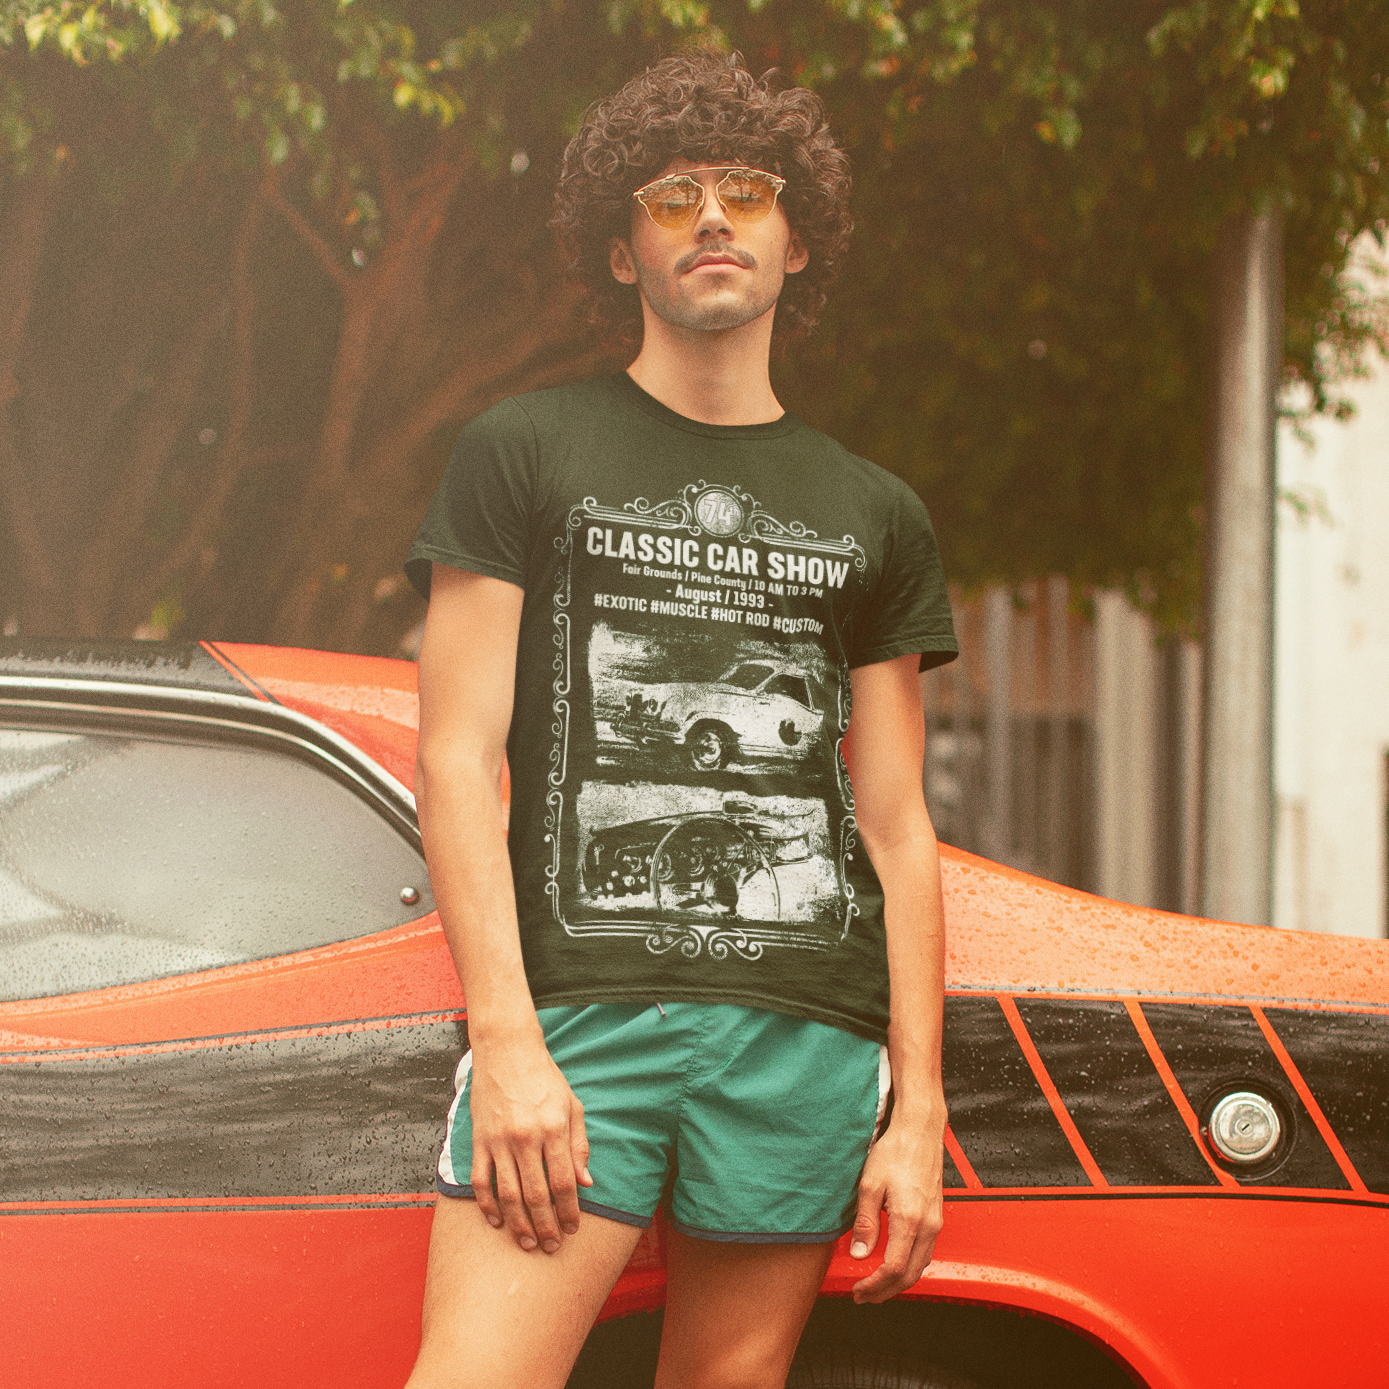 Cool guy looking all '80s in front of muscle car wearing a Numb Skull Designs tee.